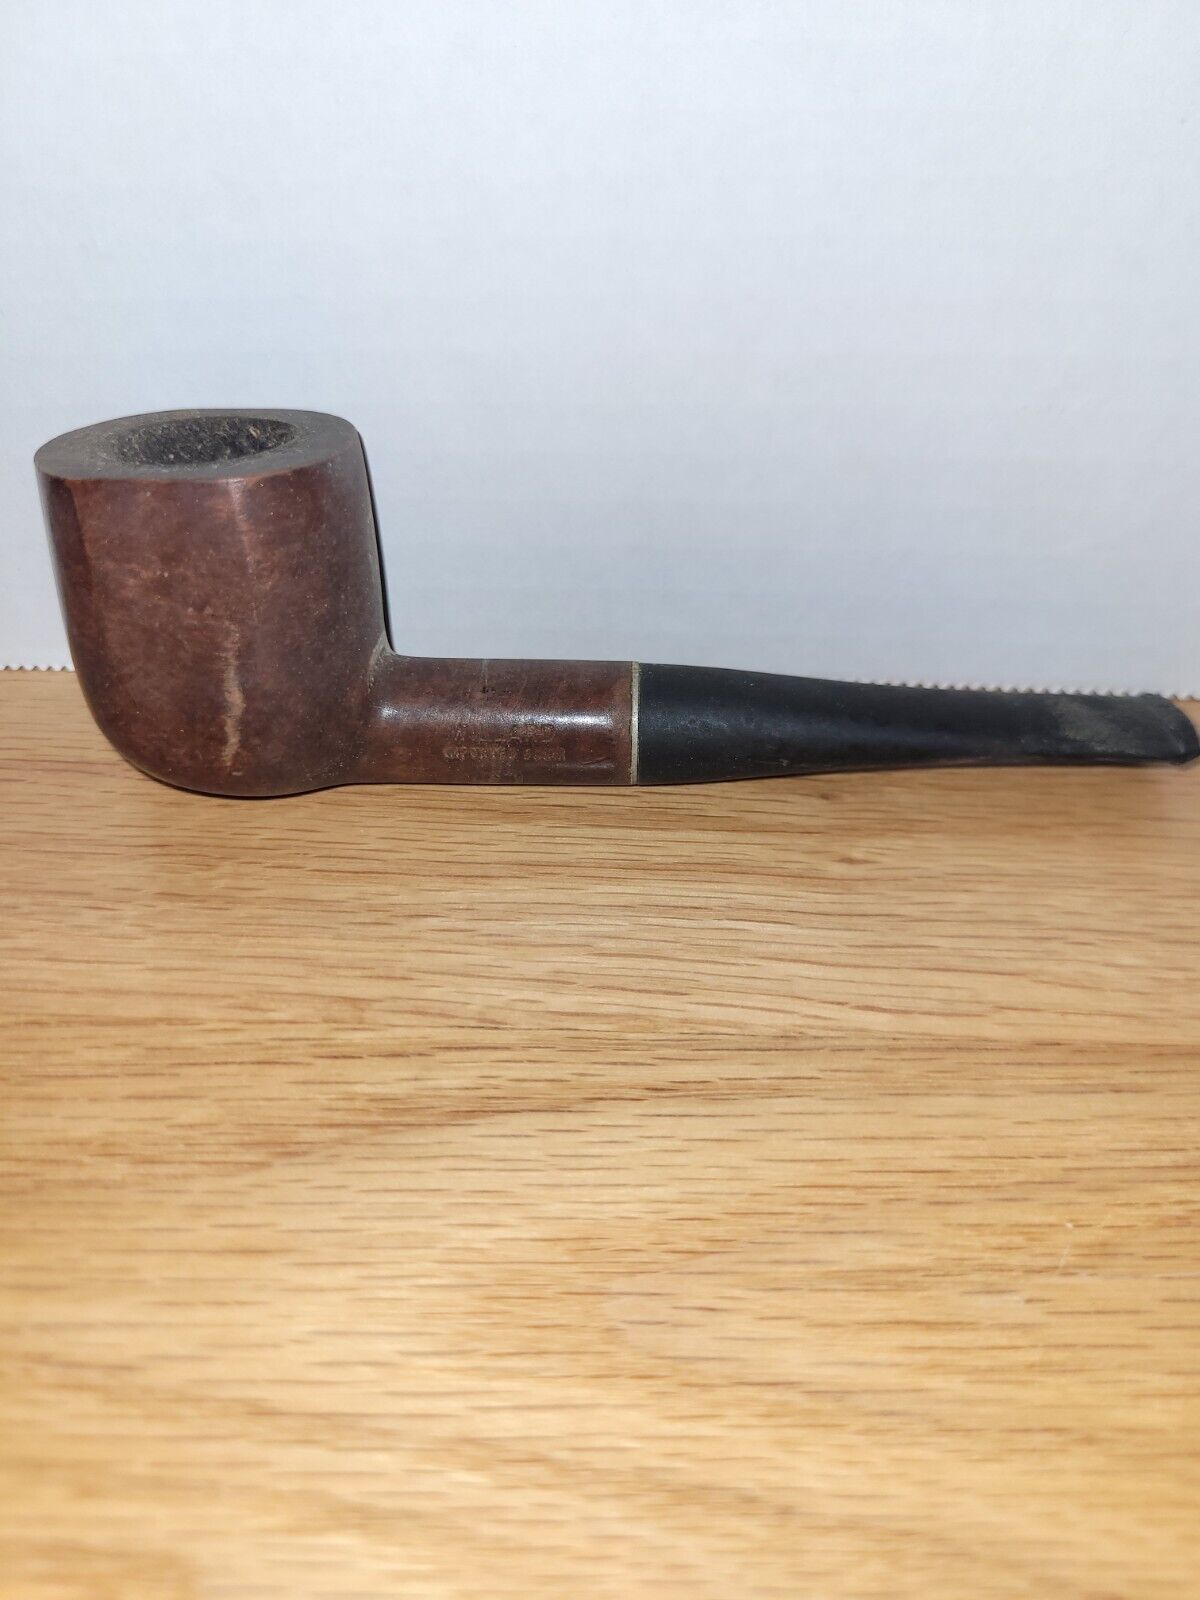 Nice Lightly Used Williard Classic  Imported Briar pipe